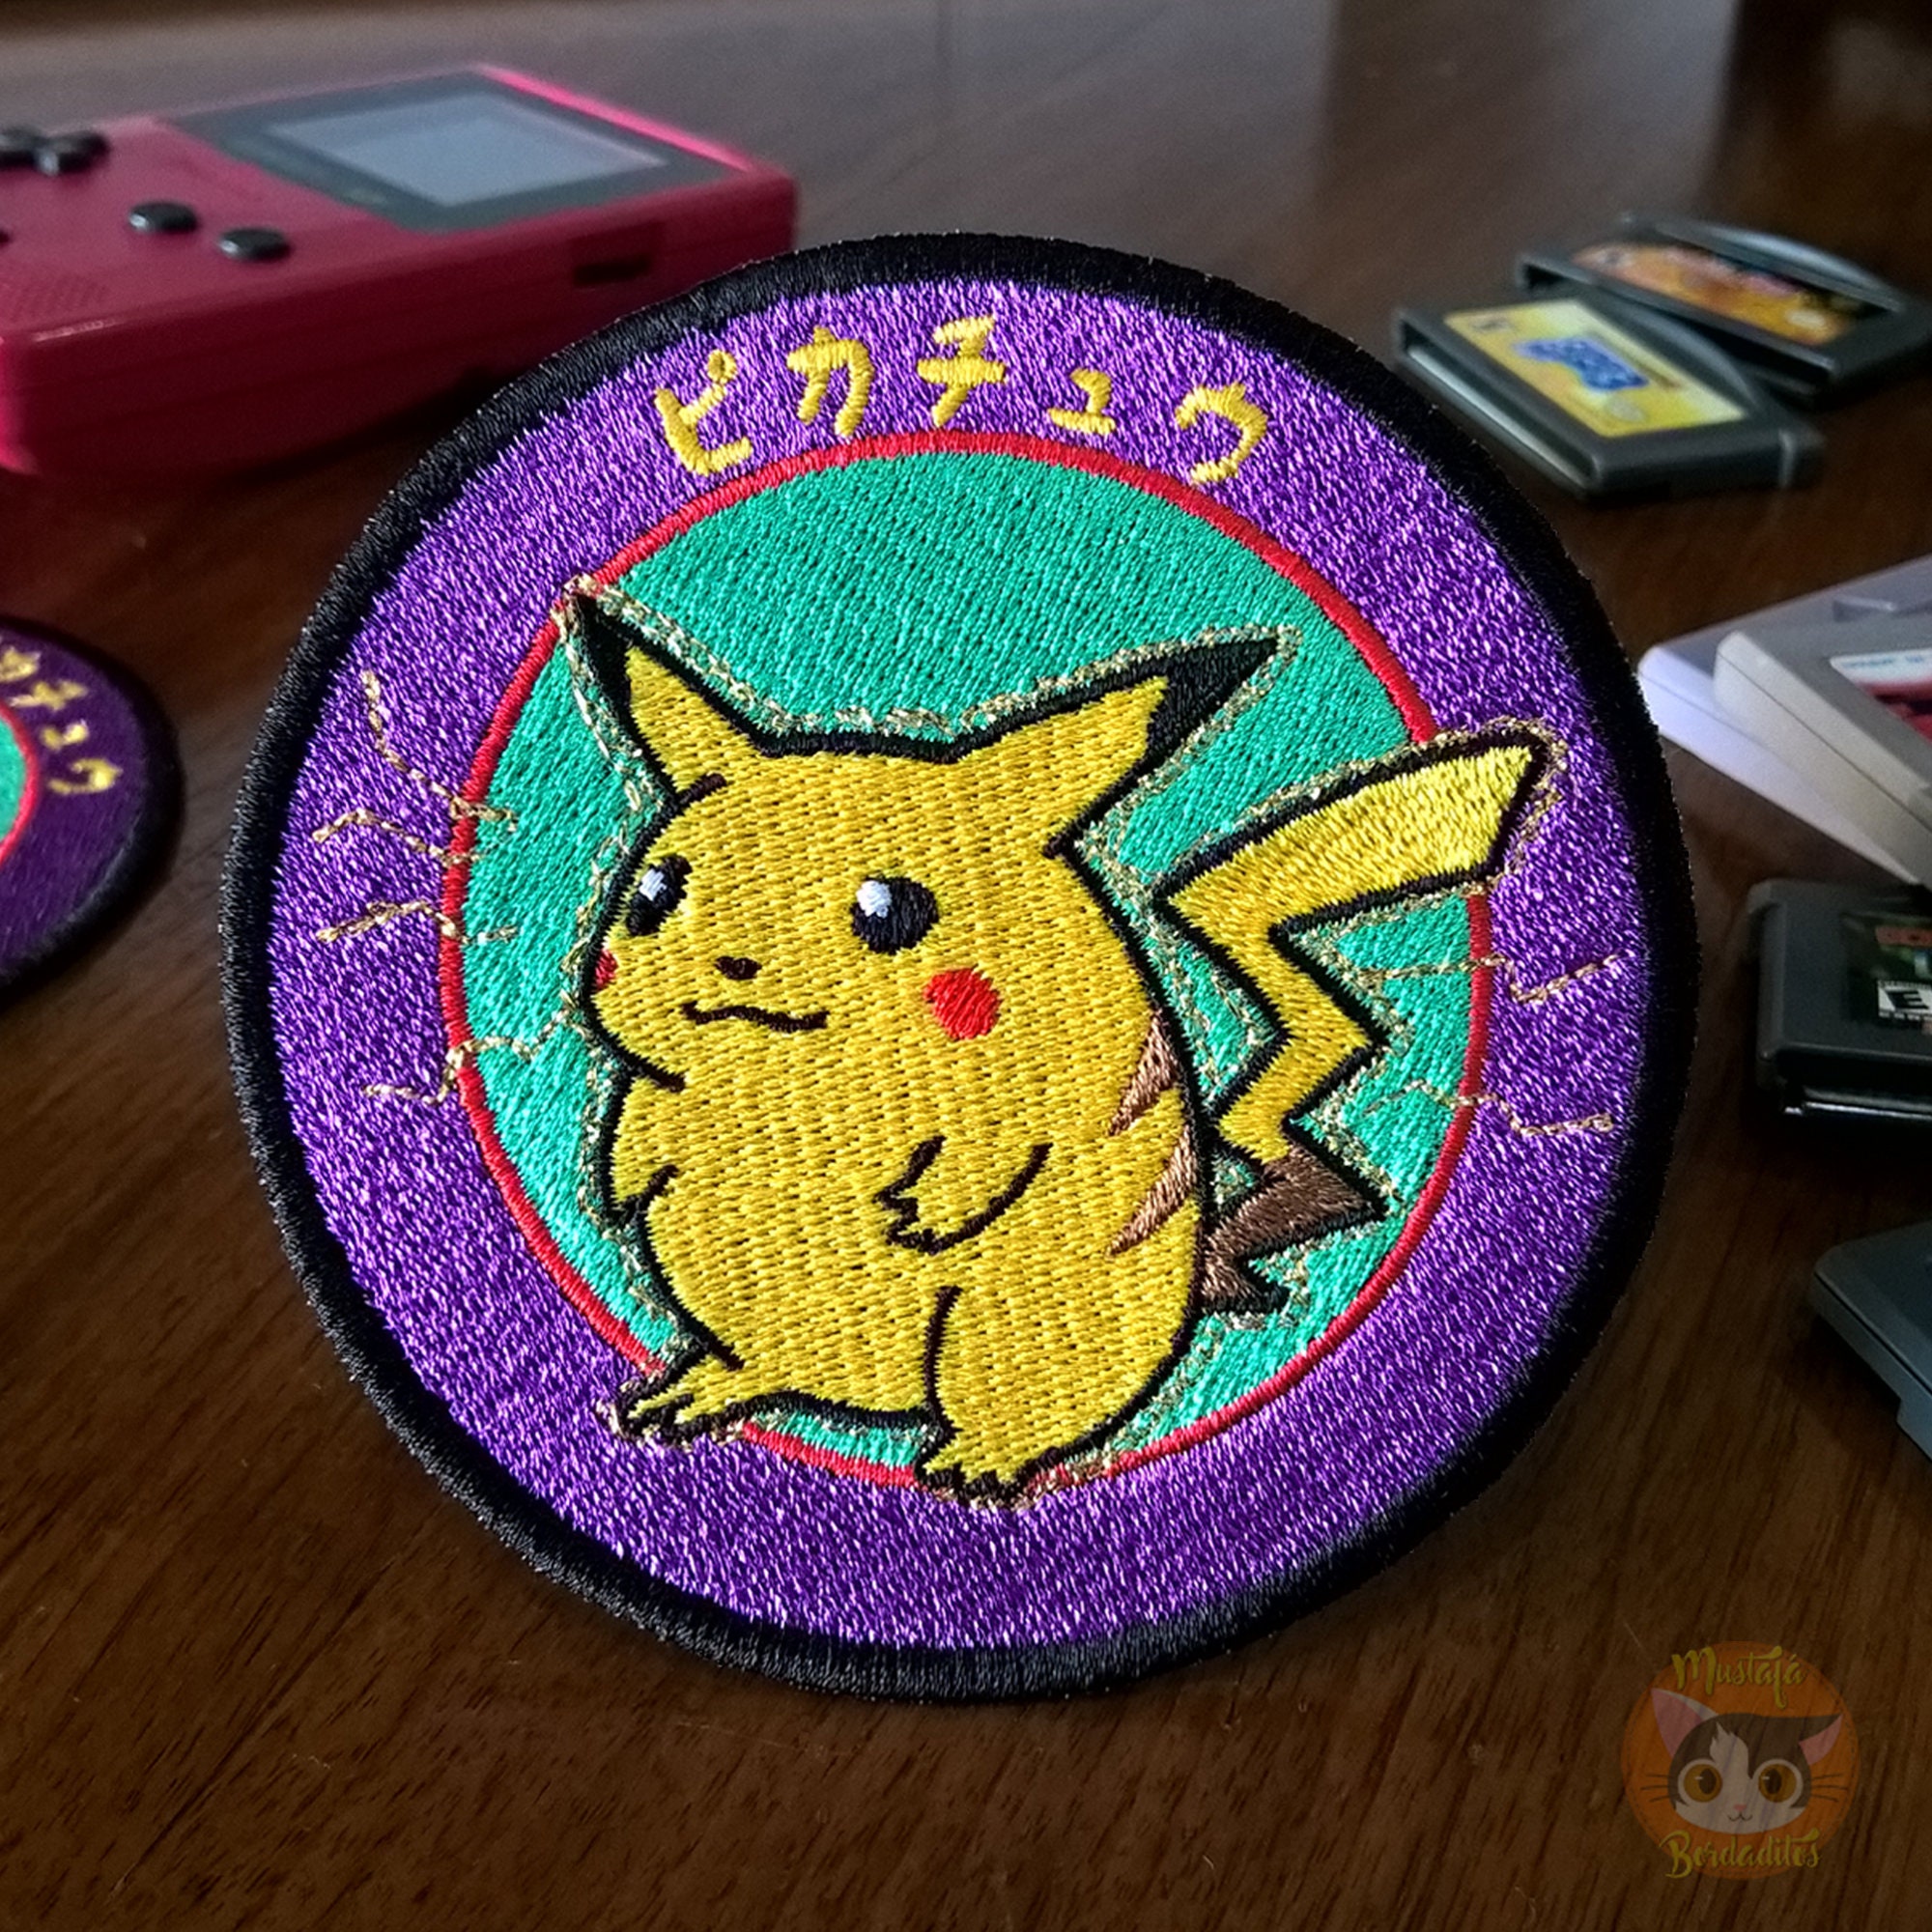 Artist Creates Super Chubby Pokémon Pins That Will Make You Squeal